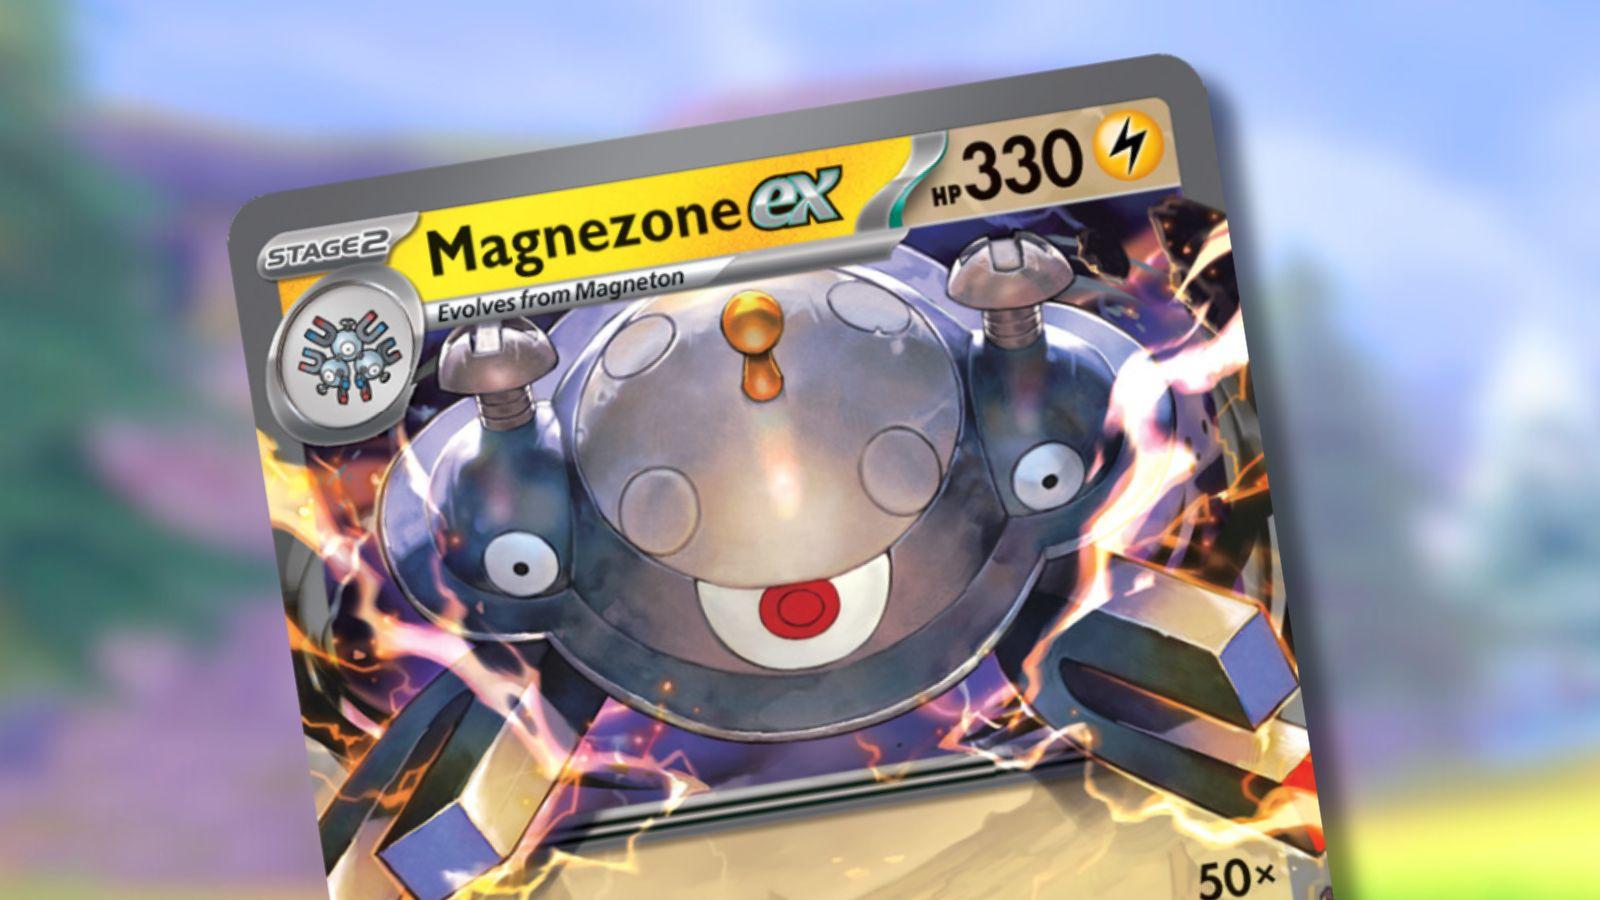 Magnezone ex Pokemon card with blurred background.